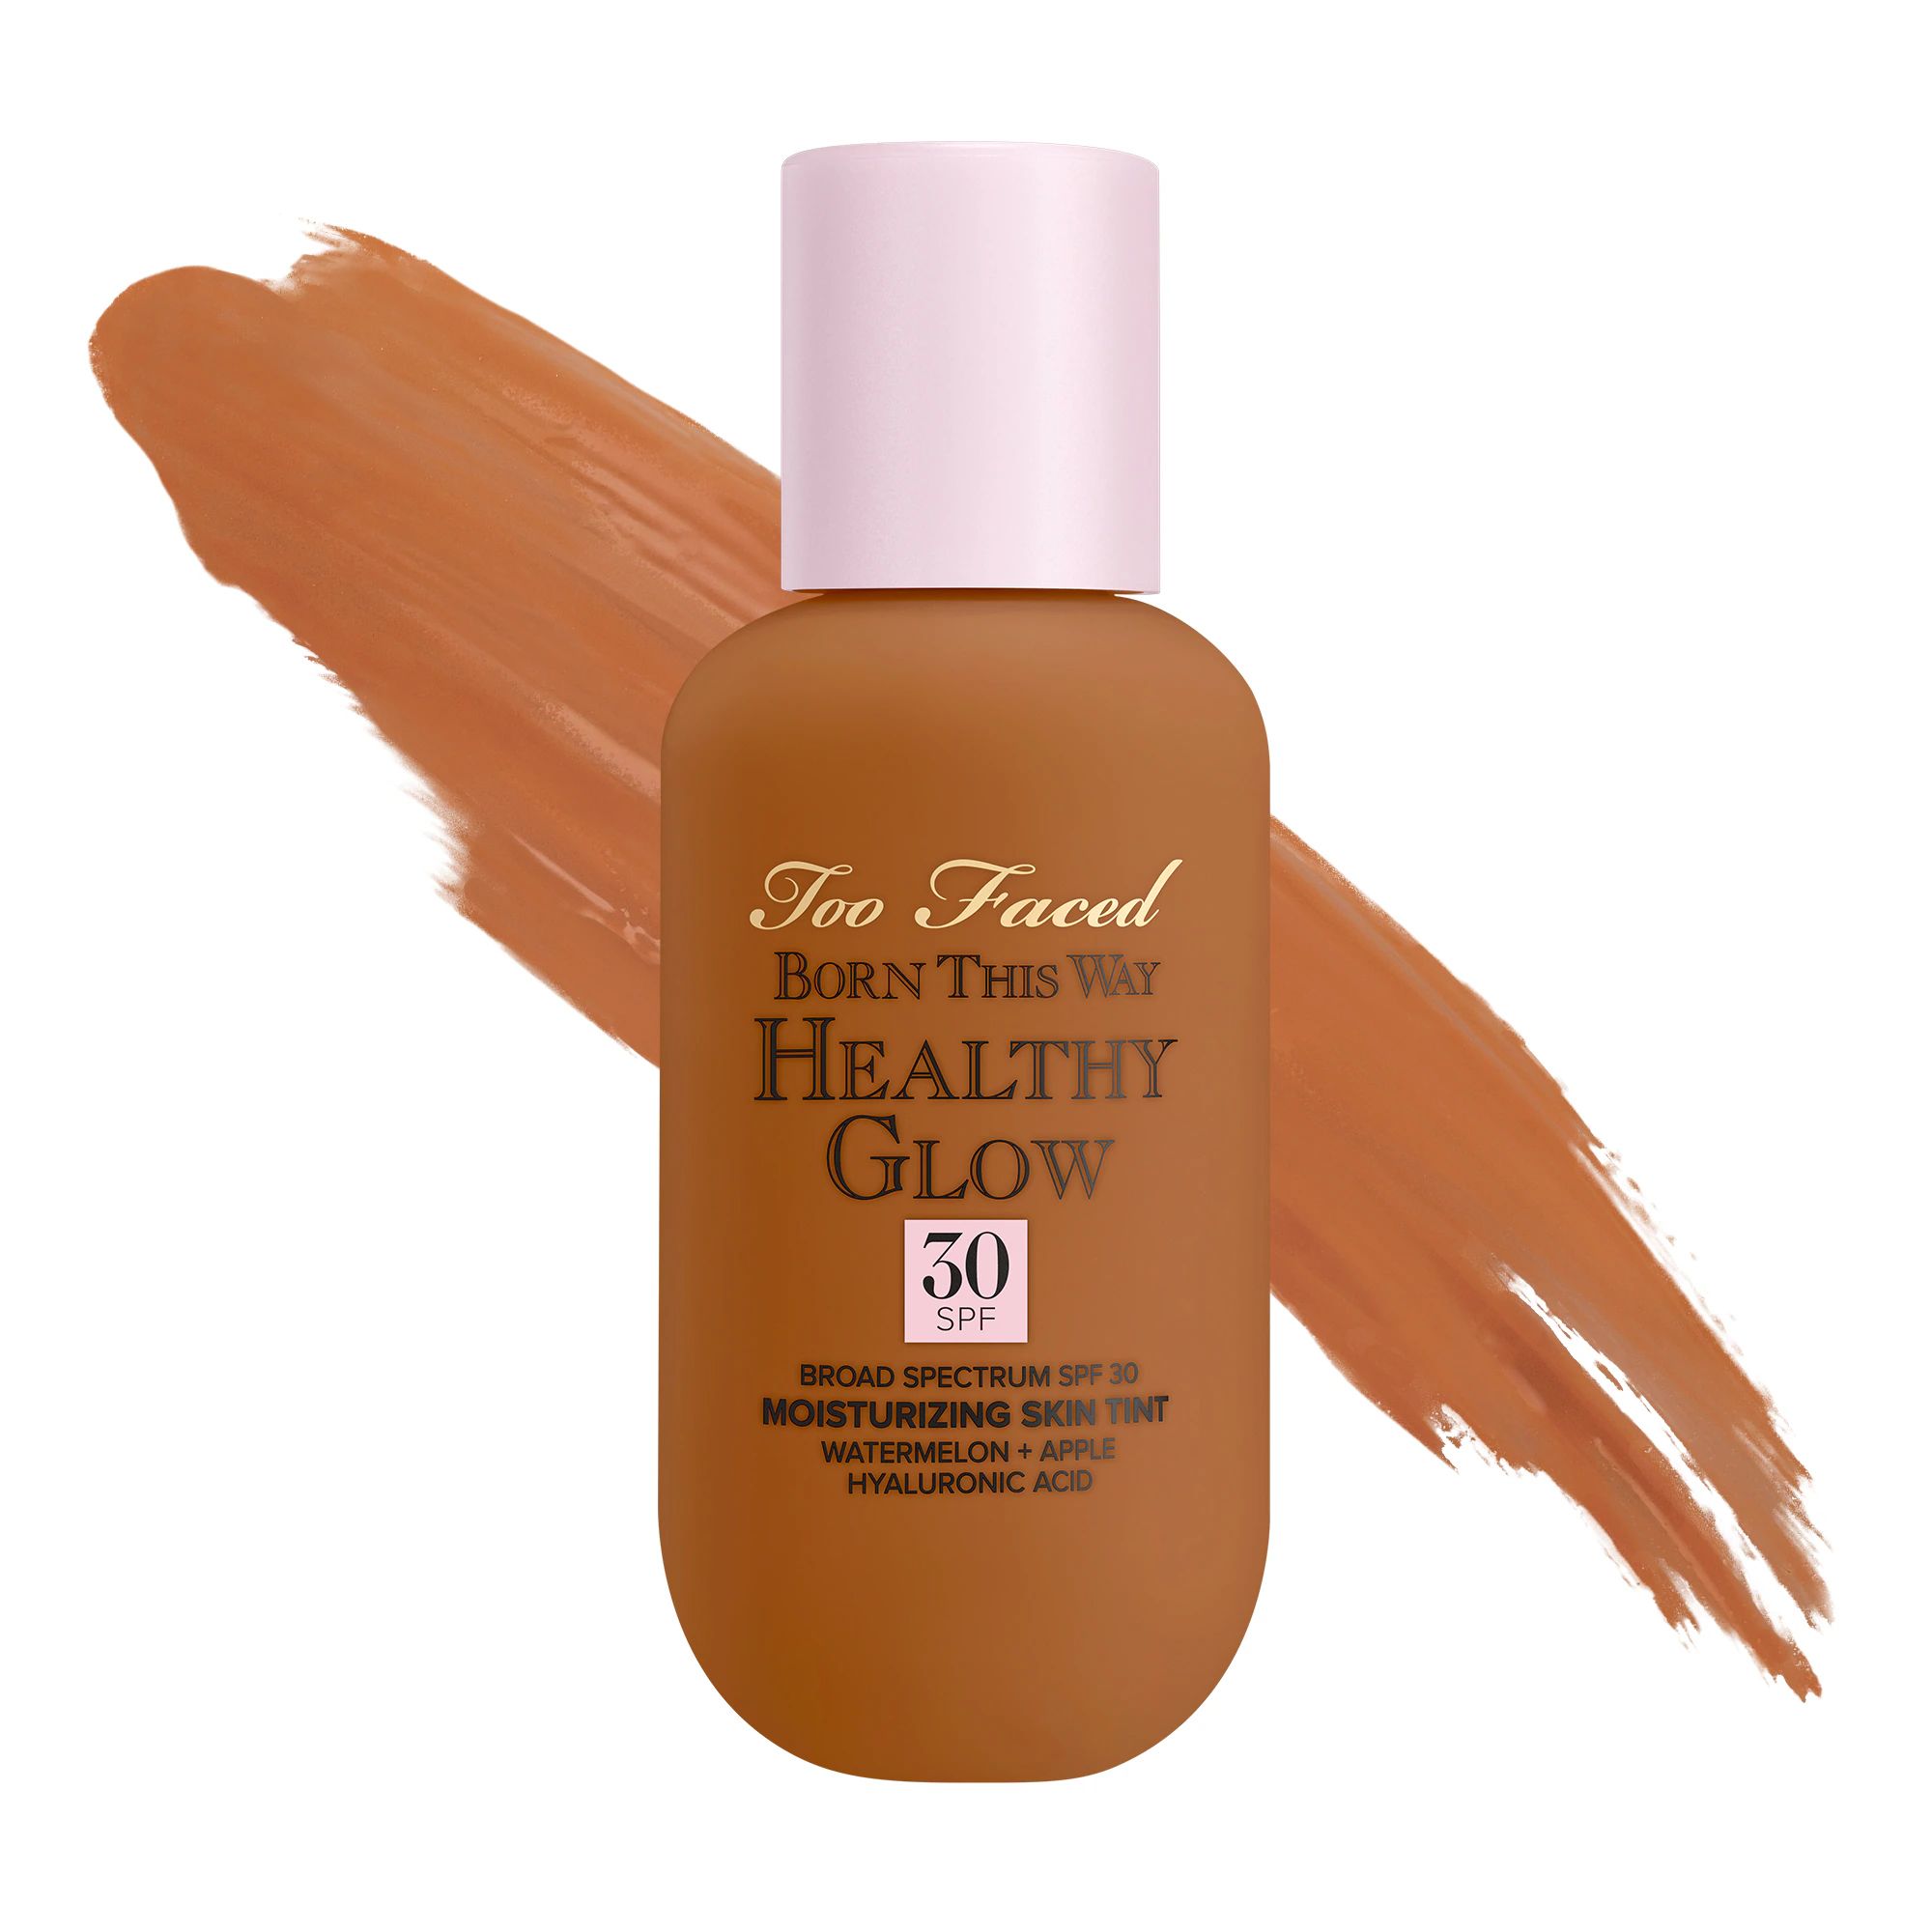 Born This Way Healthy Glow Hydrating Skin Tint Foundation | Too Faced US